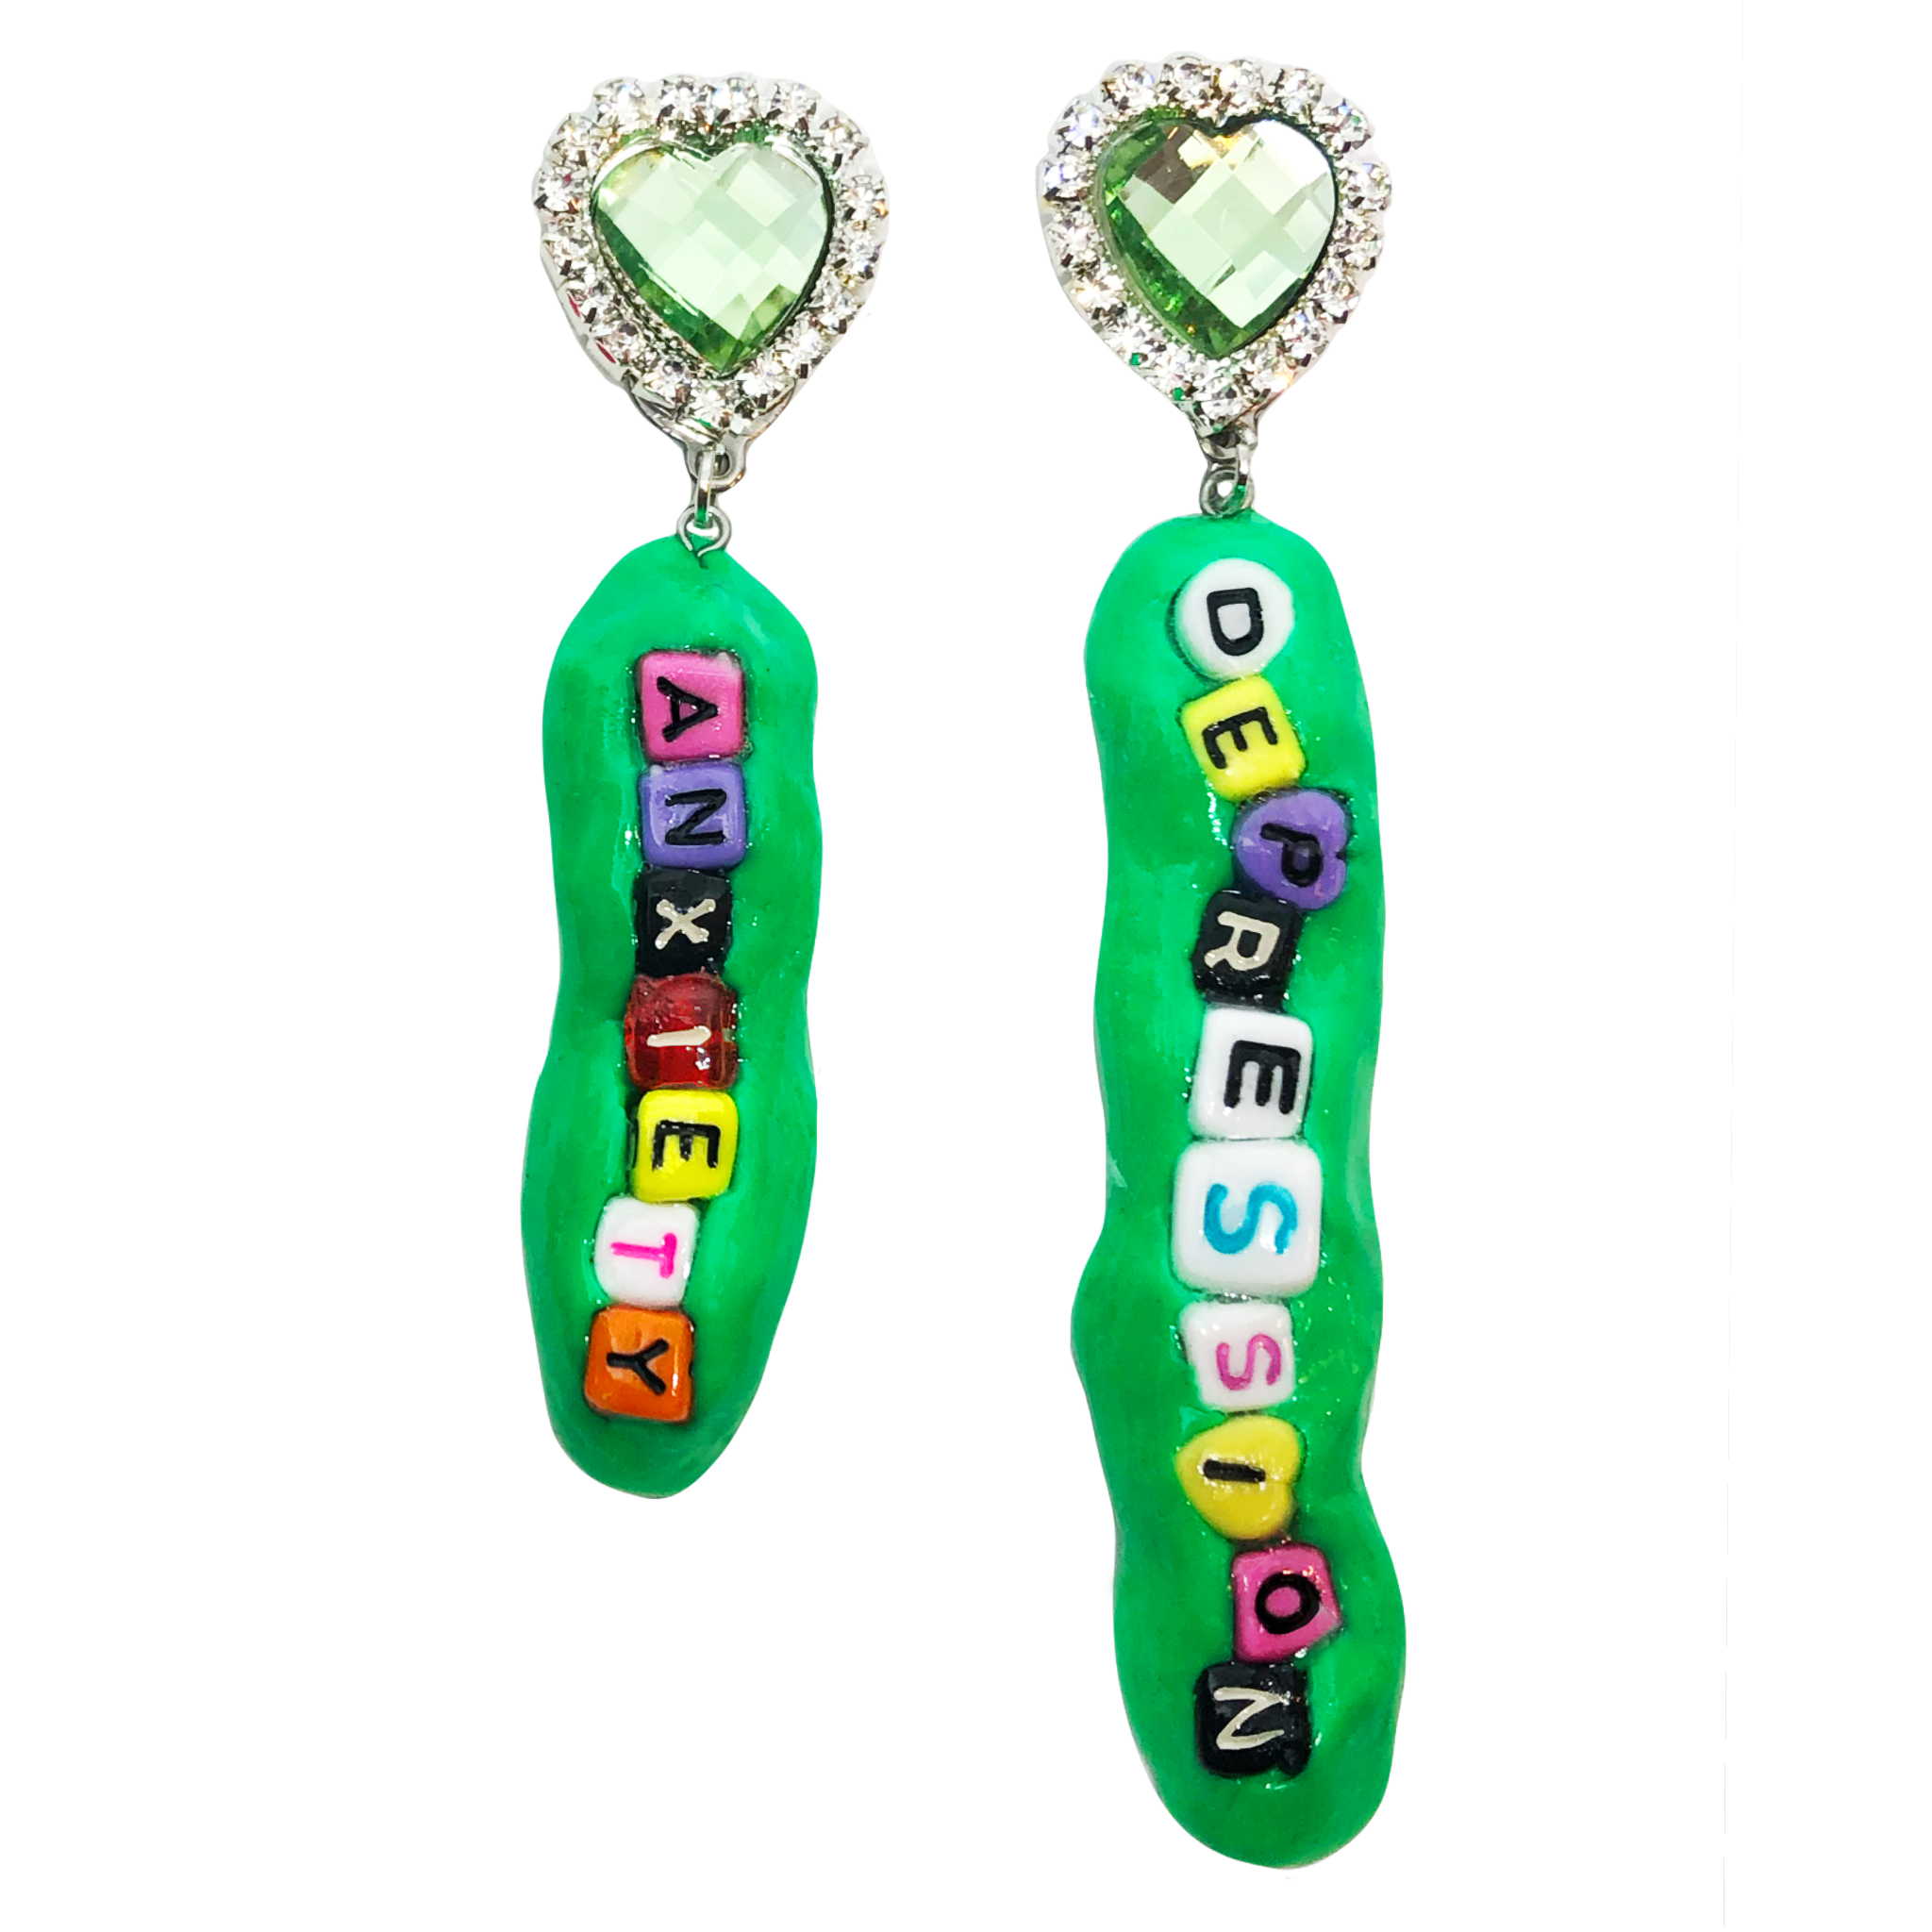 Green Anxiety Depression Earrings